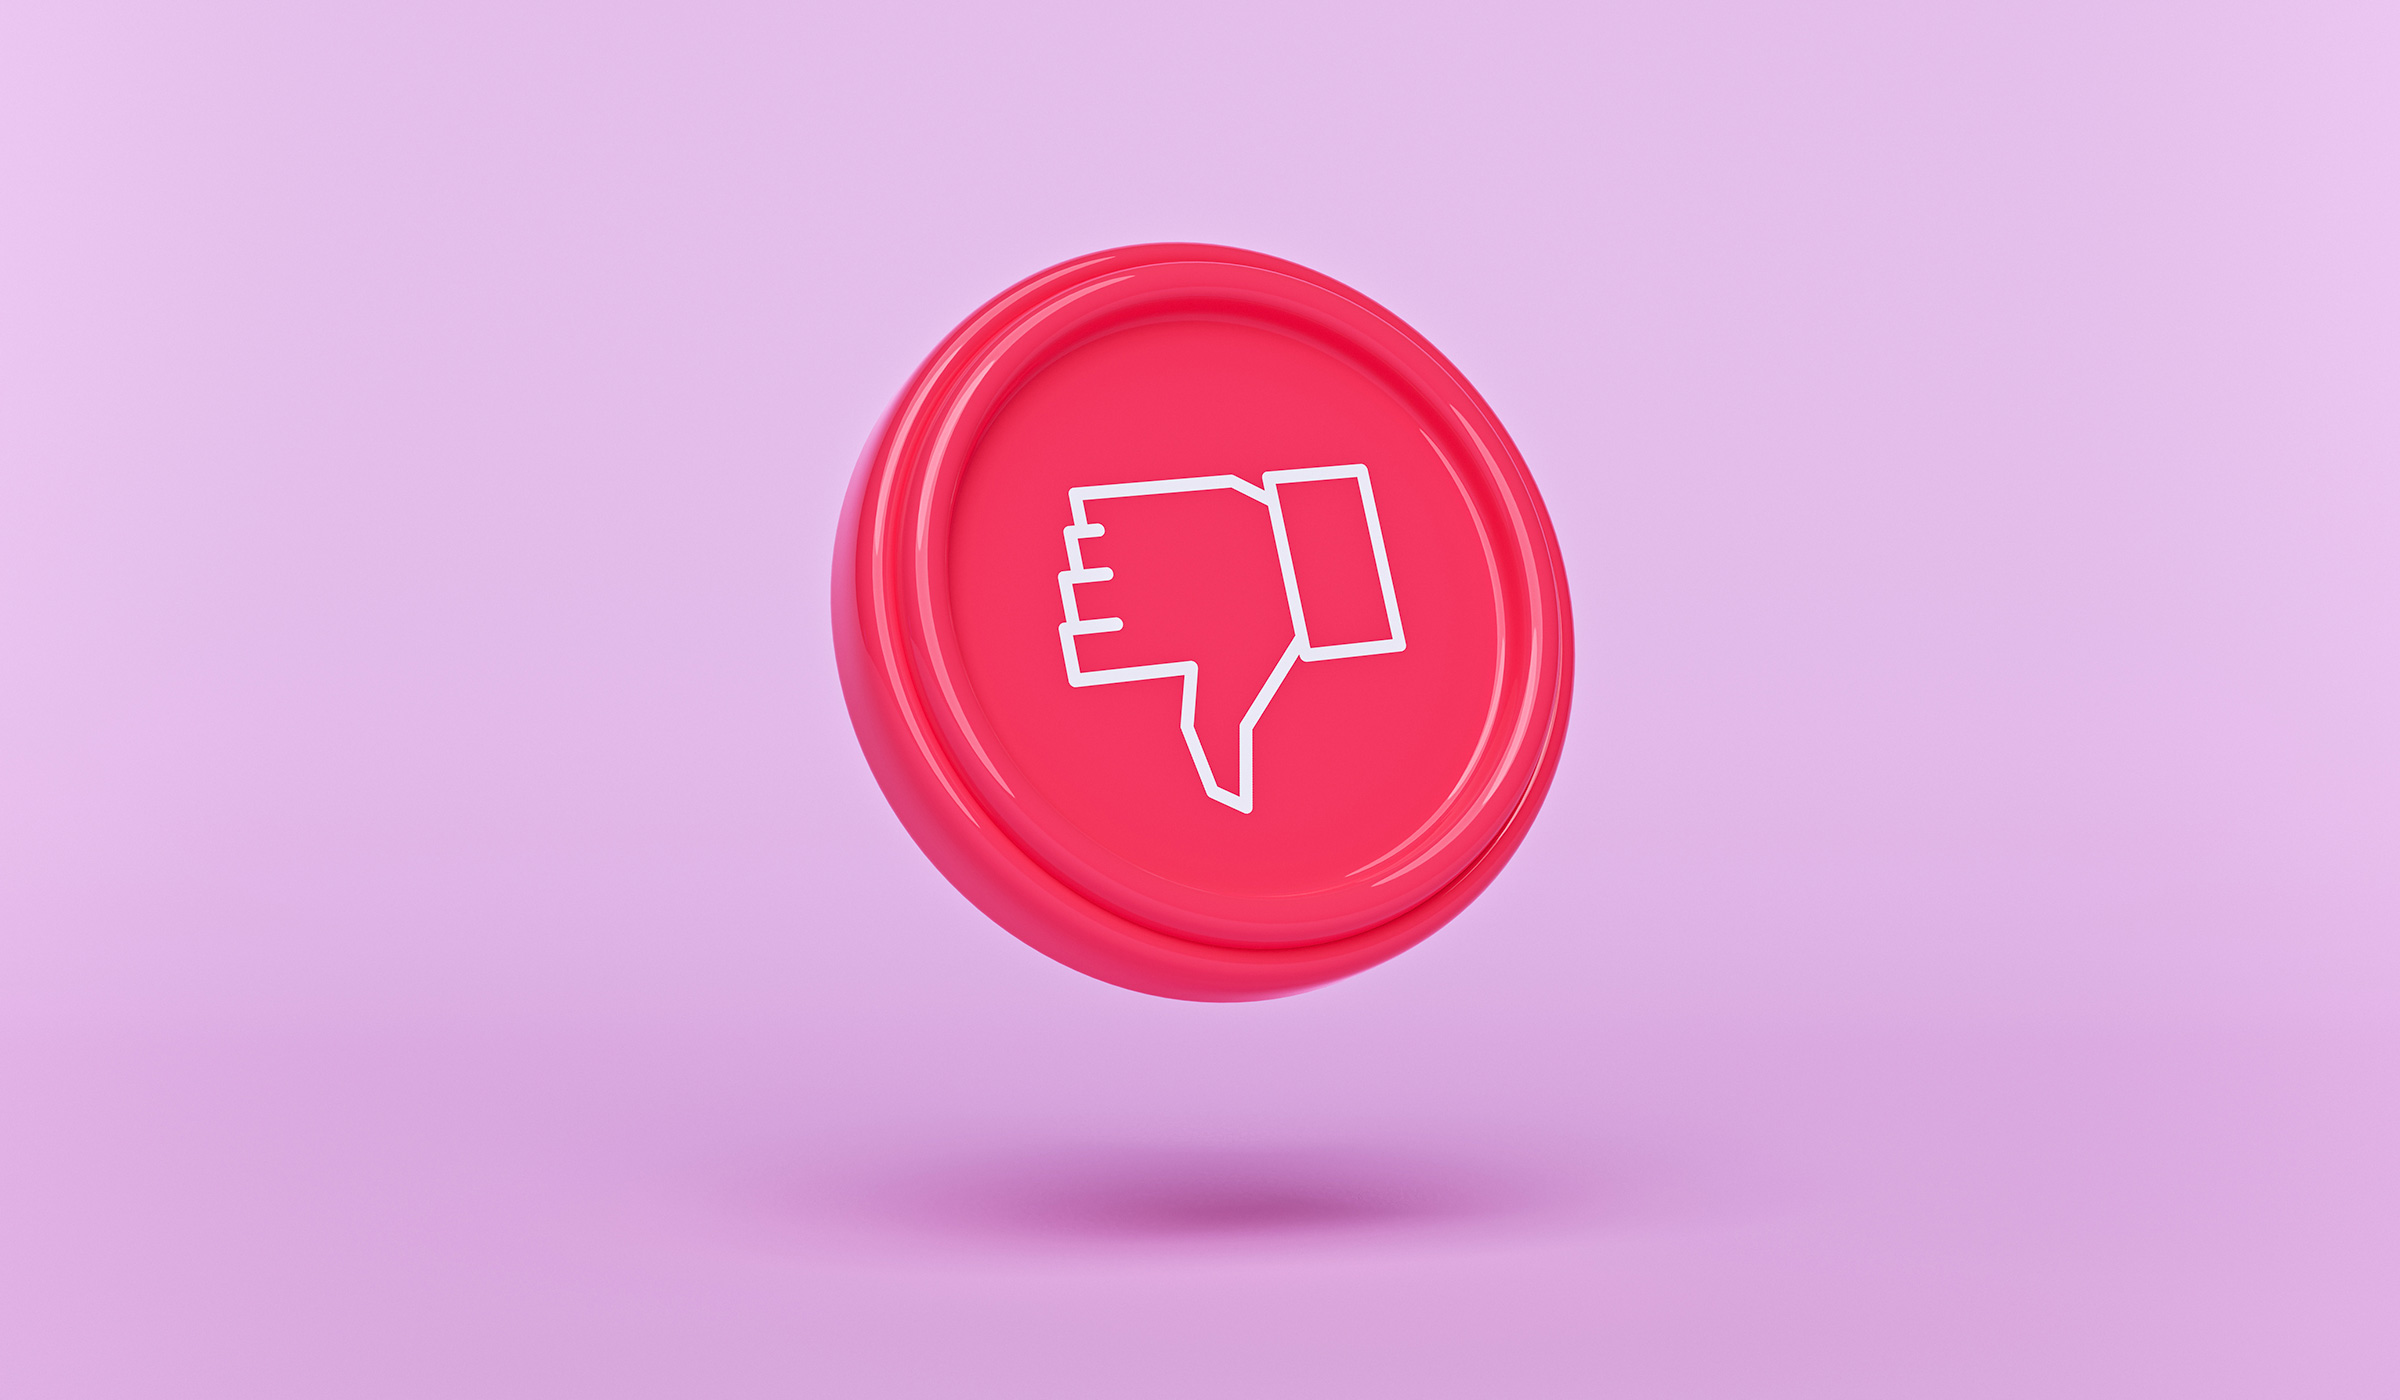 Key Mistakes to Avoid When Responding to Negative Comments Online